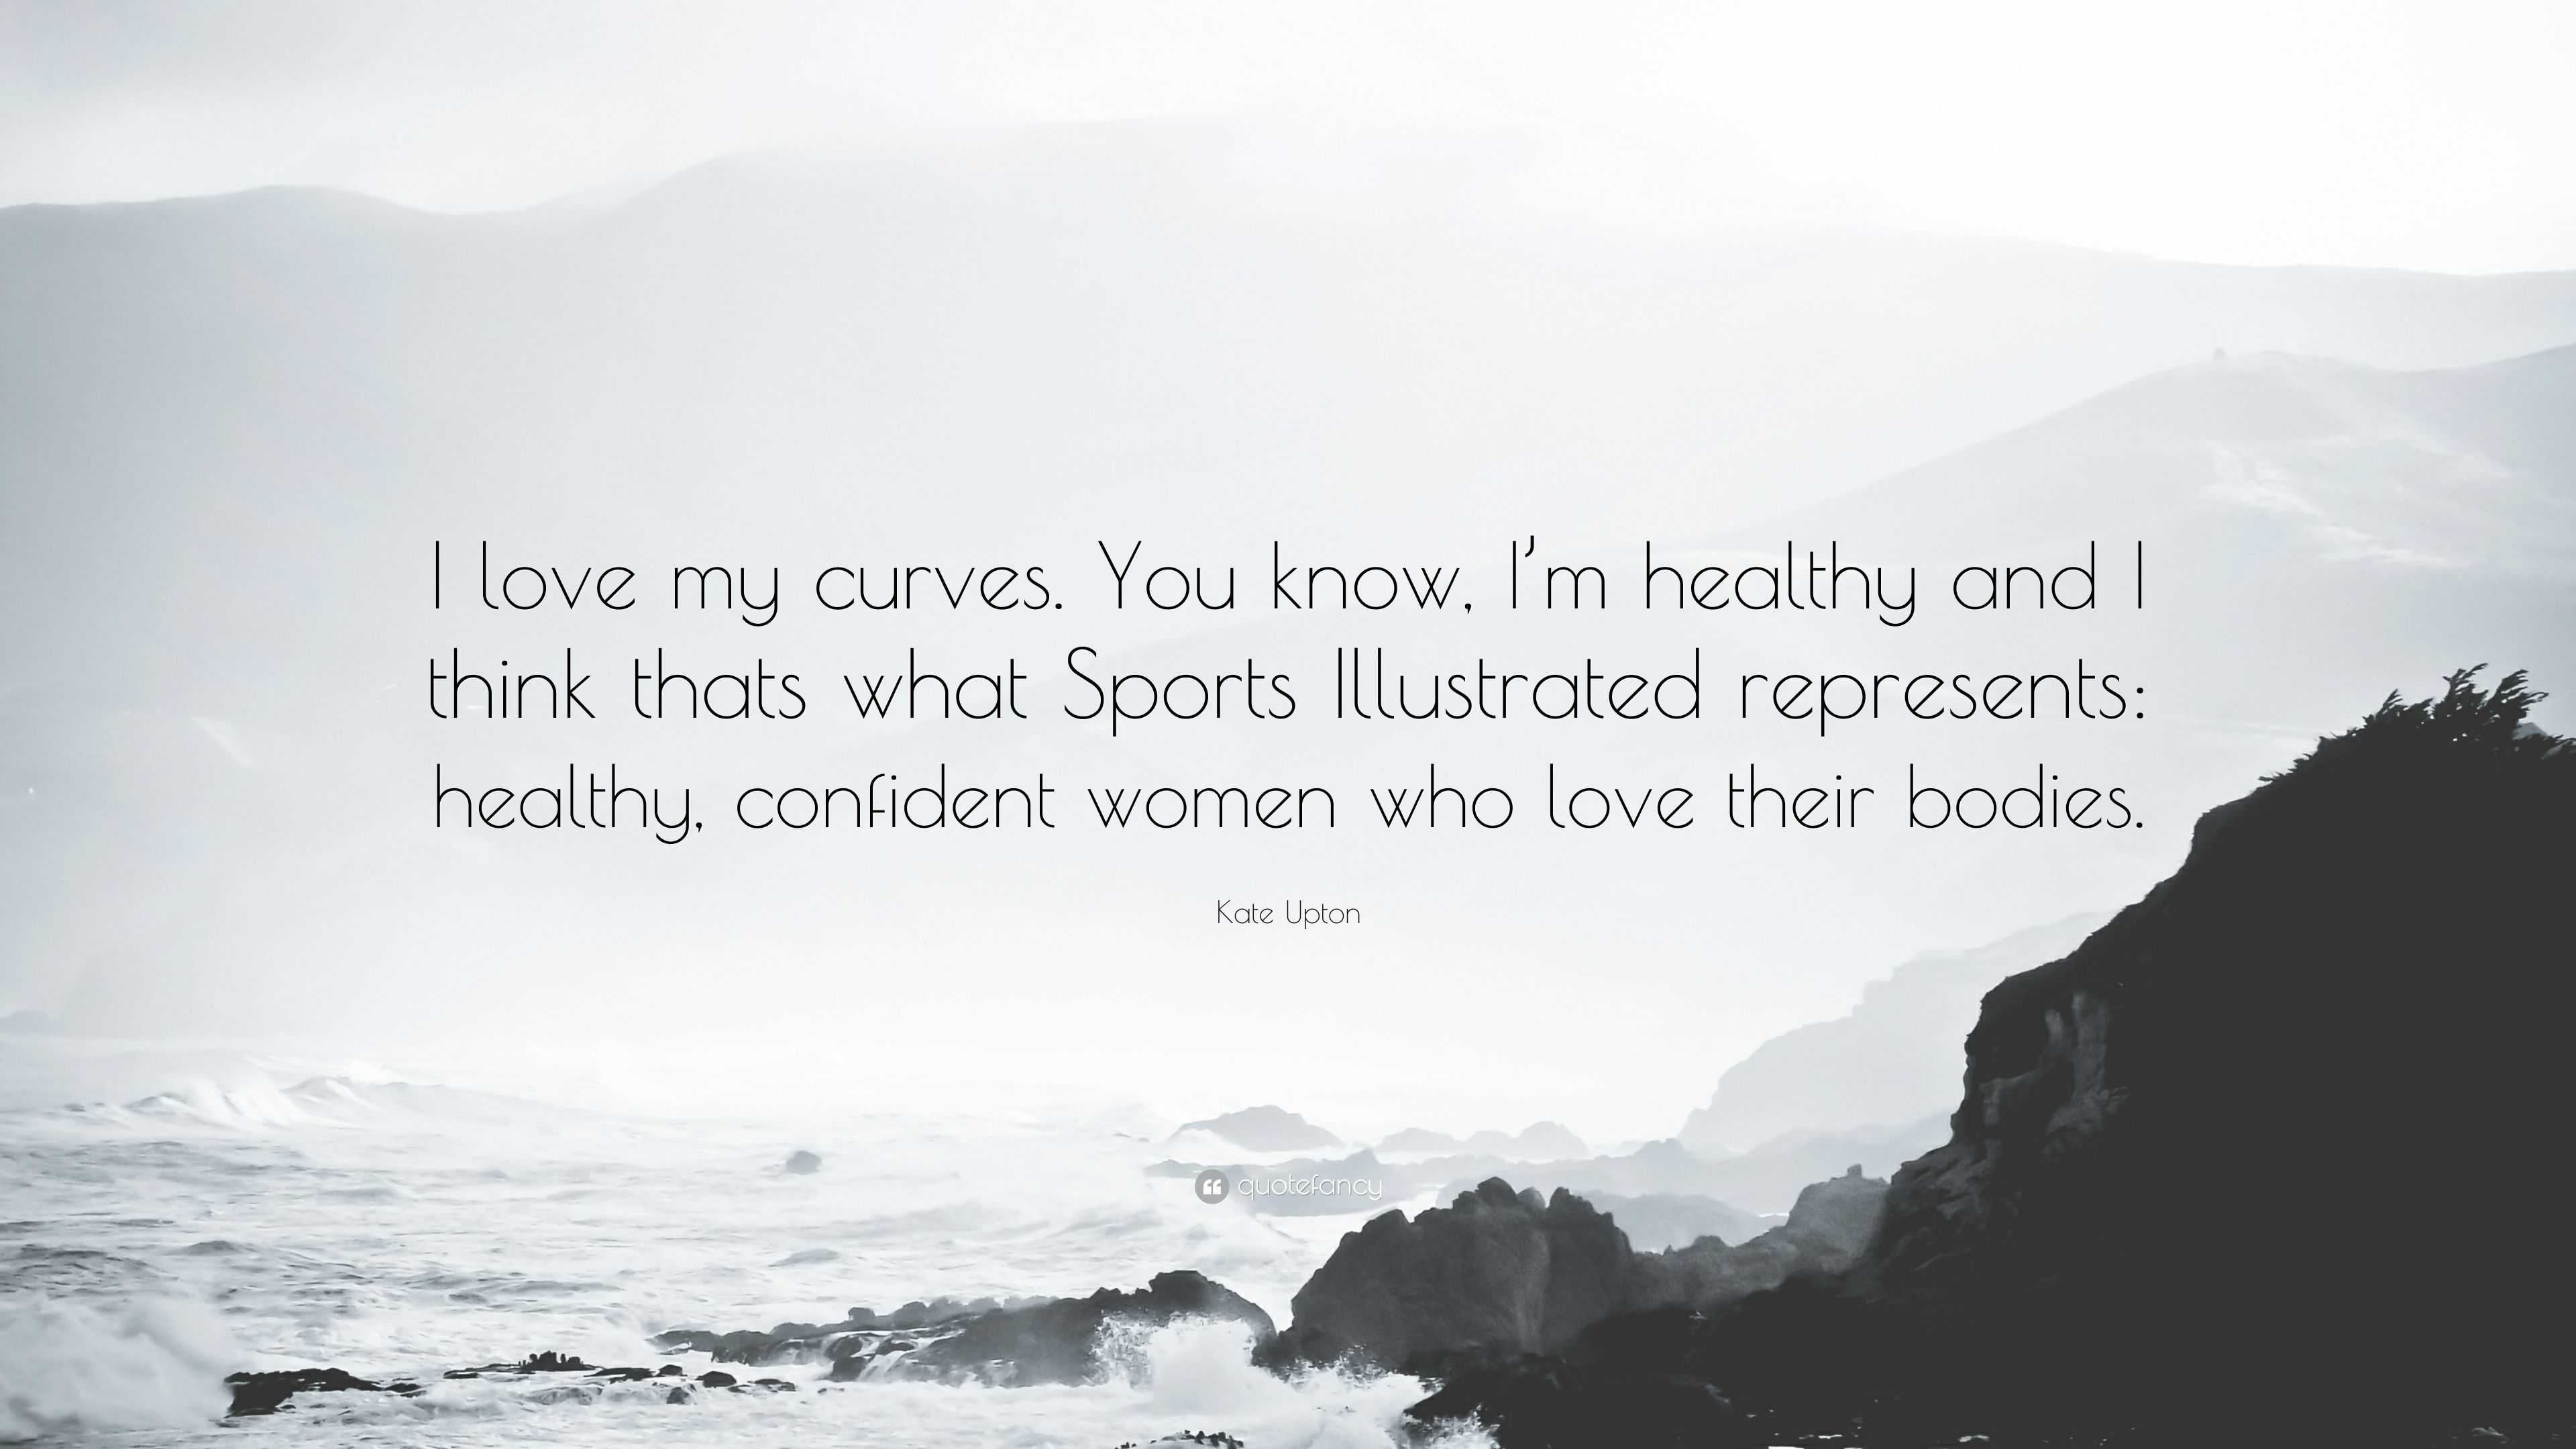 Kate Upton Quote: “I love my curves. You know, I'm healthy and I think  thats what Sports Illustrated represents: healthy, confident women w”